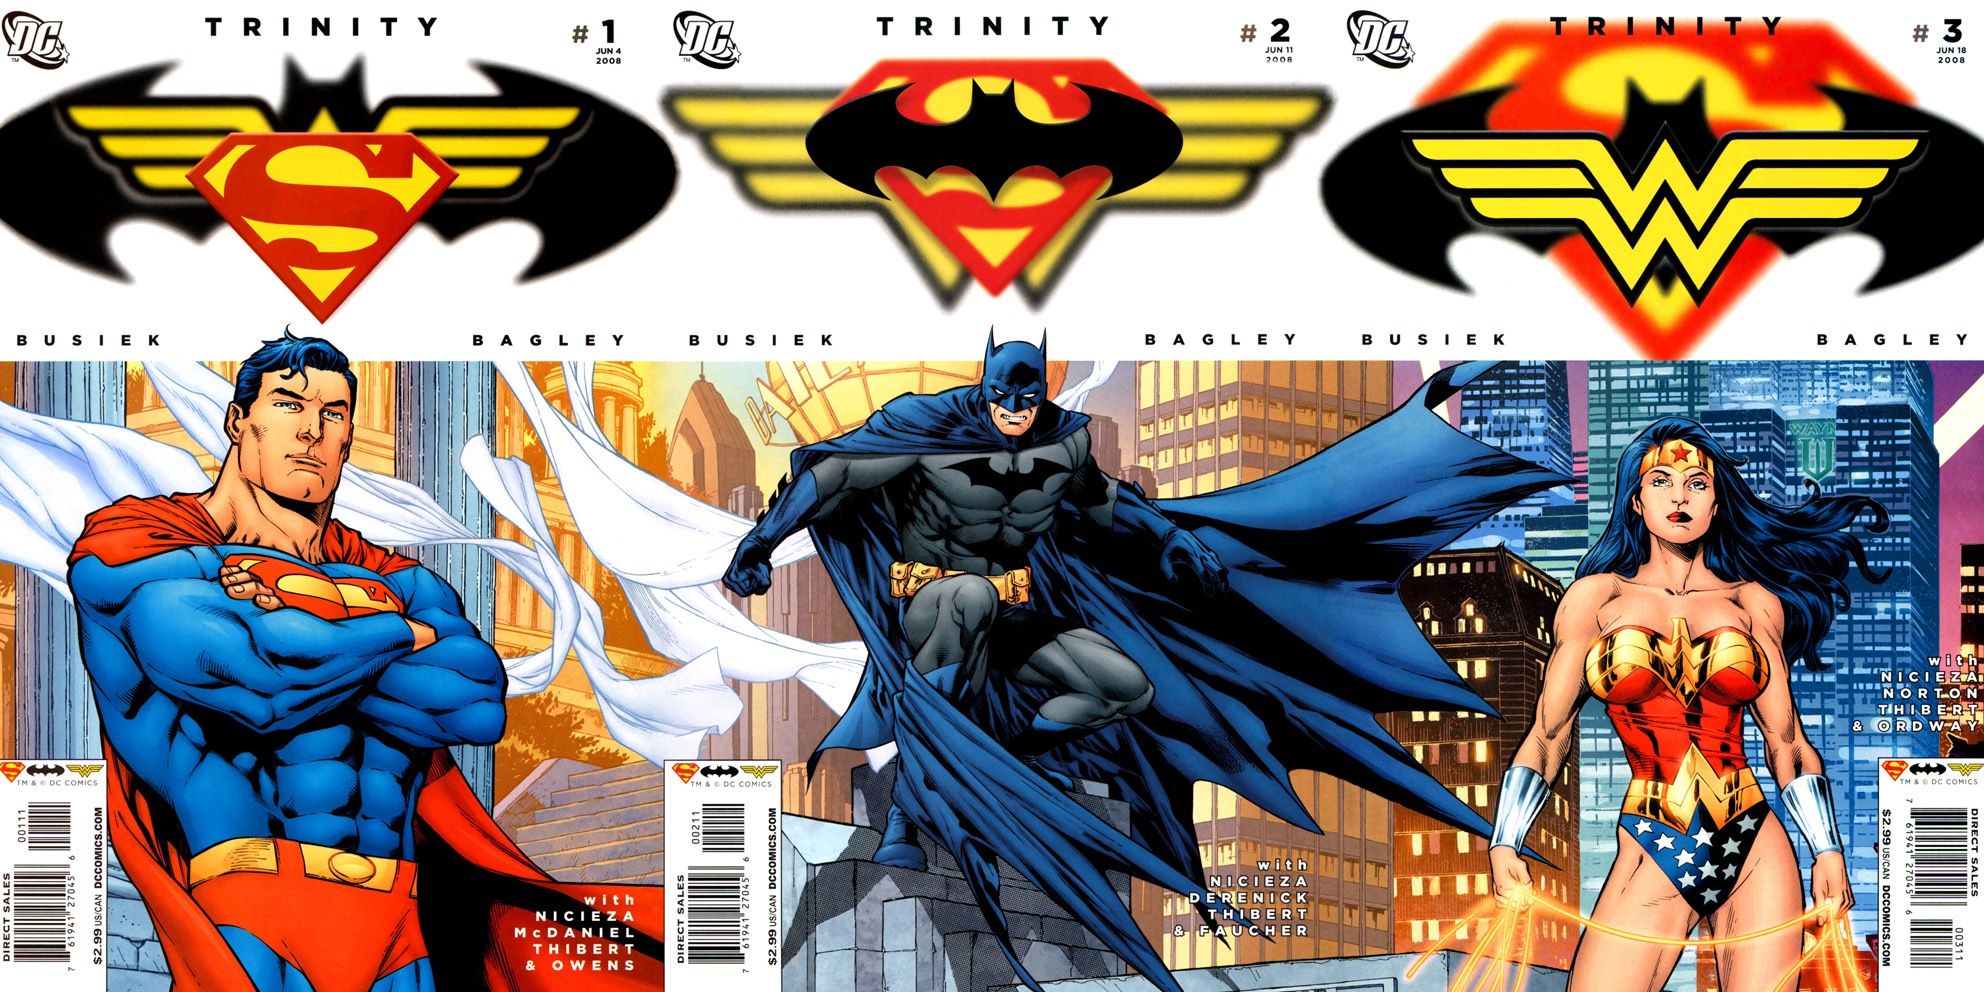 Carlos Pacheco's covers for 2008's Trinity issues #1-3